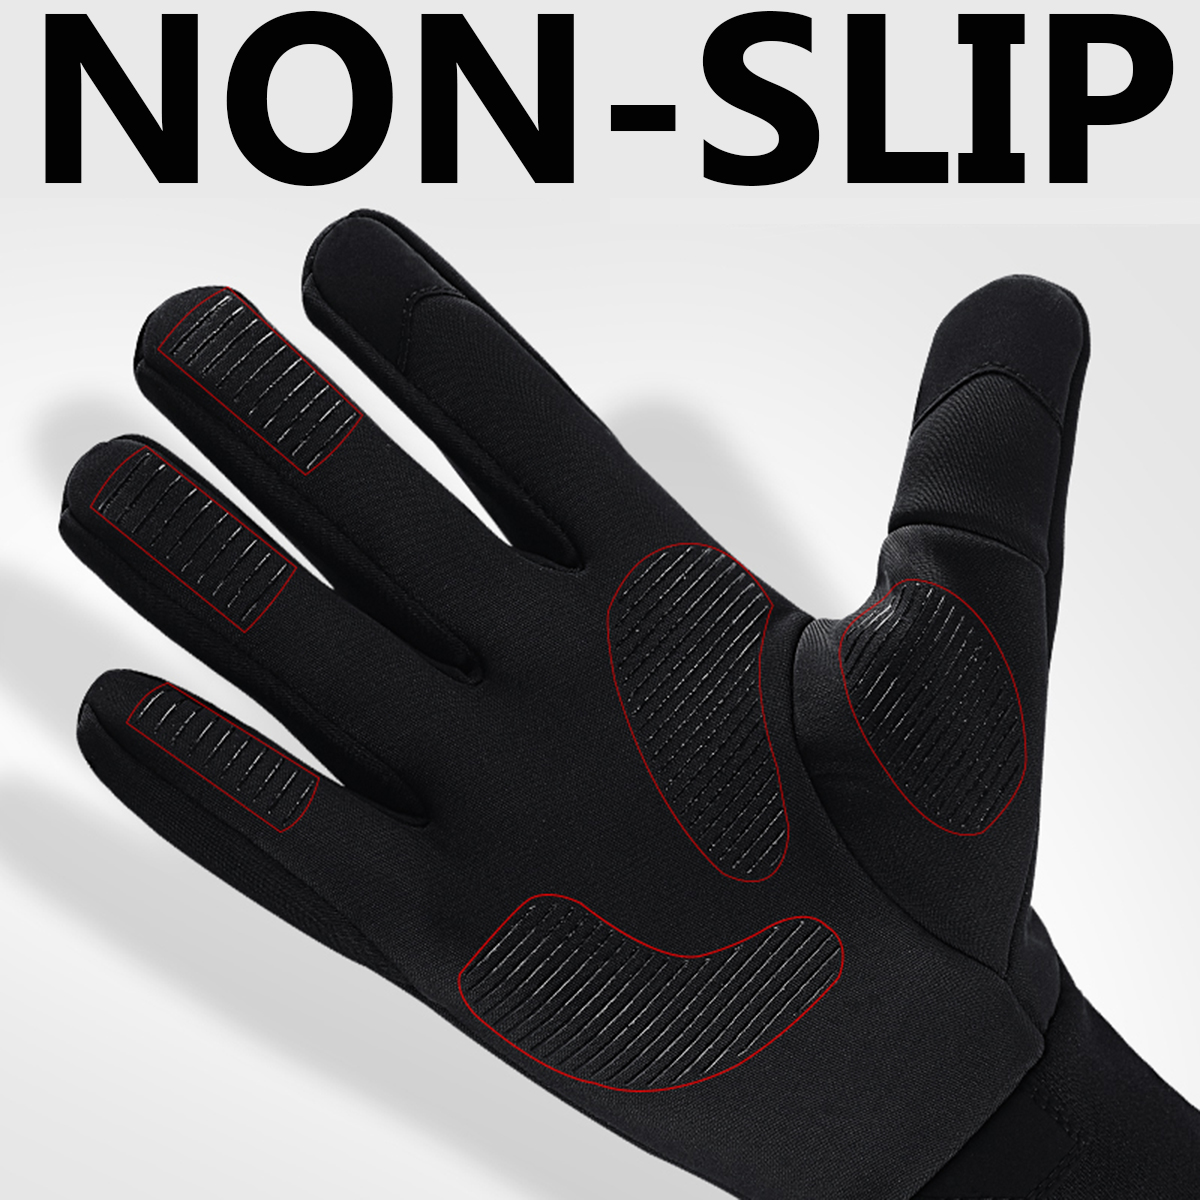 Winter-Warm-Thermal-Gloves-Skiing-Snow-Snowboard-Cycling-Touchscreen-Waterproof-Windproof-Gloves-1613607-5